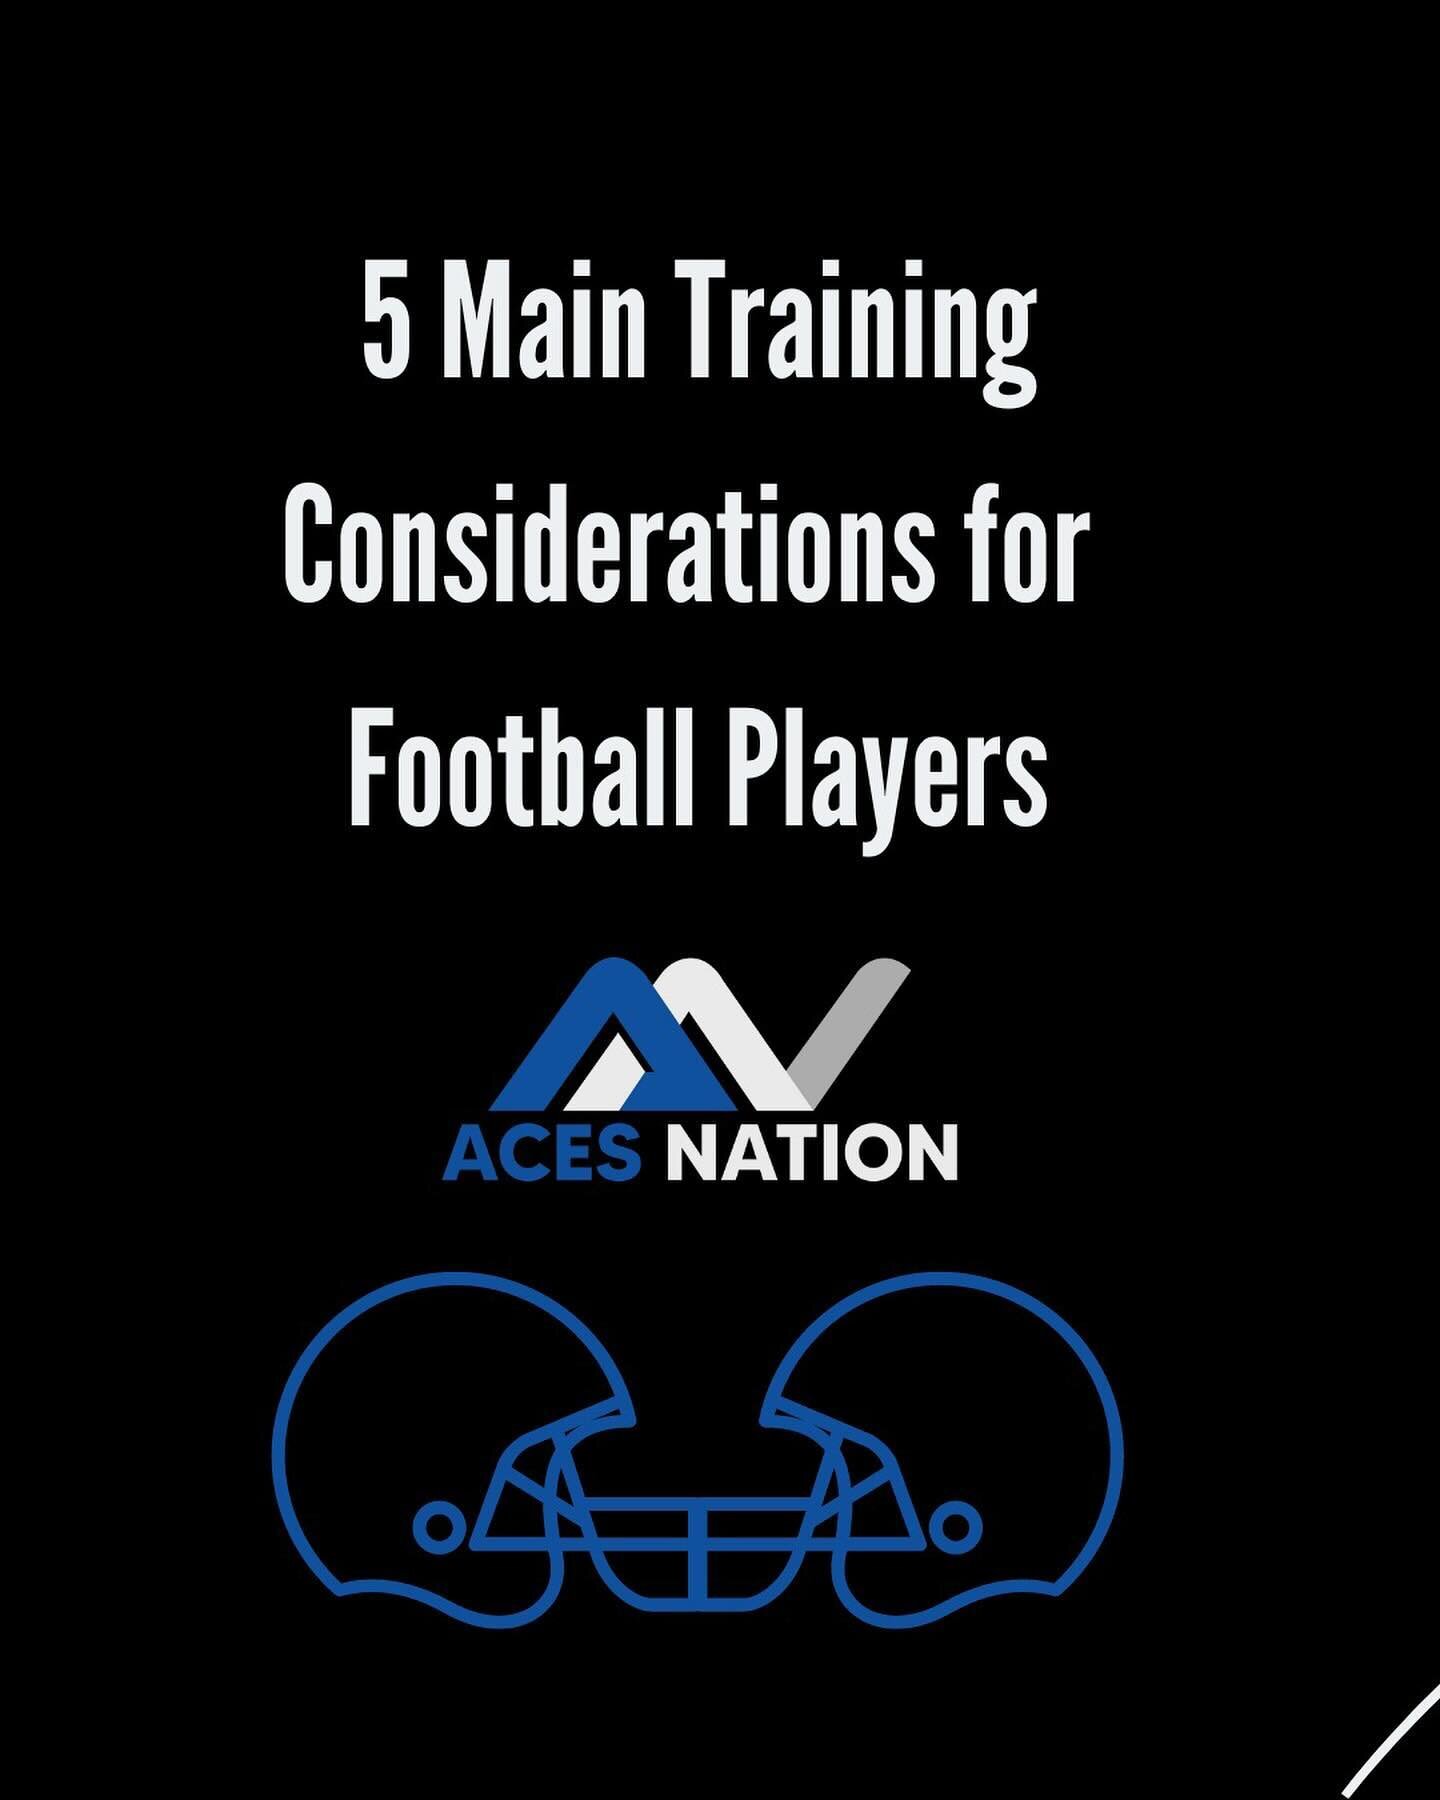 🏈Attention football athletes and coaches!🏈
Athletic performance specialist, Zack Wallace, is highlighting five key training considerations essential for optimizing performance on the field:

▪️Plyometrics: Enhance your explosive power and agility w